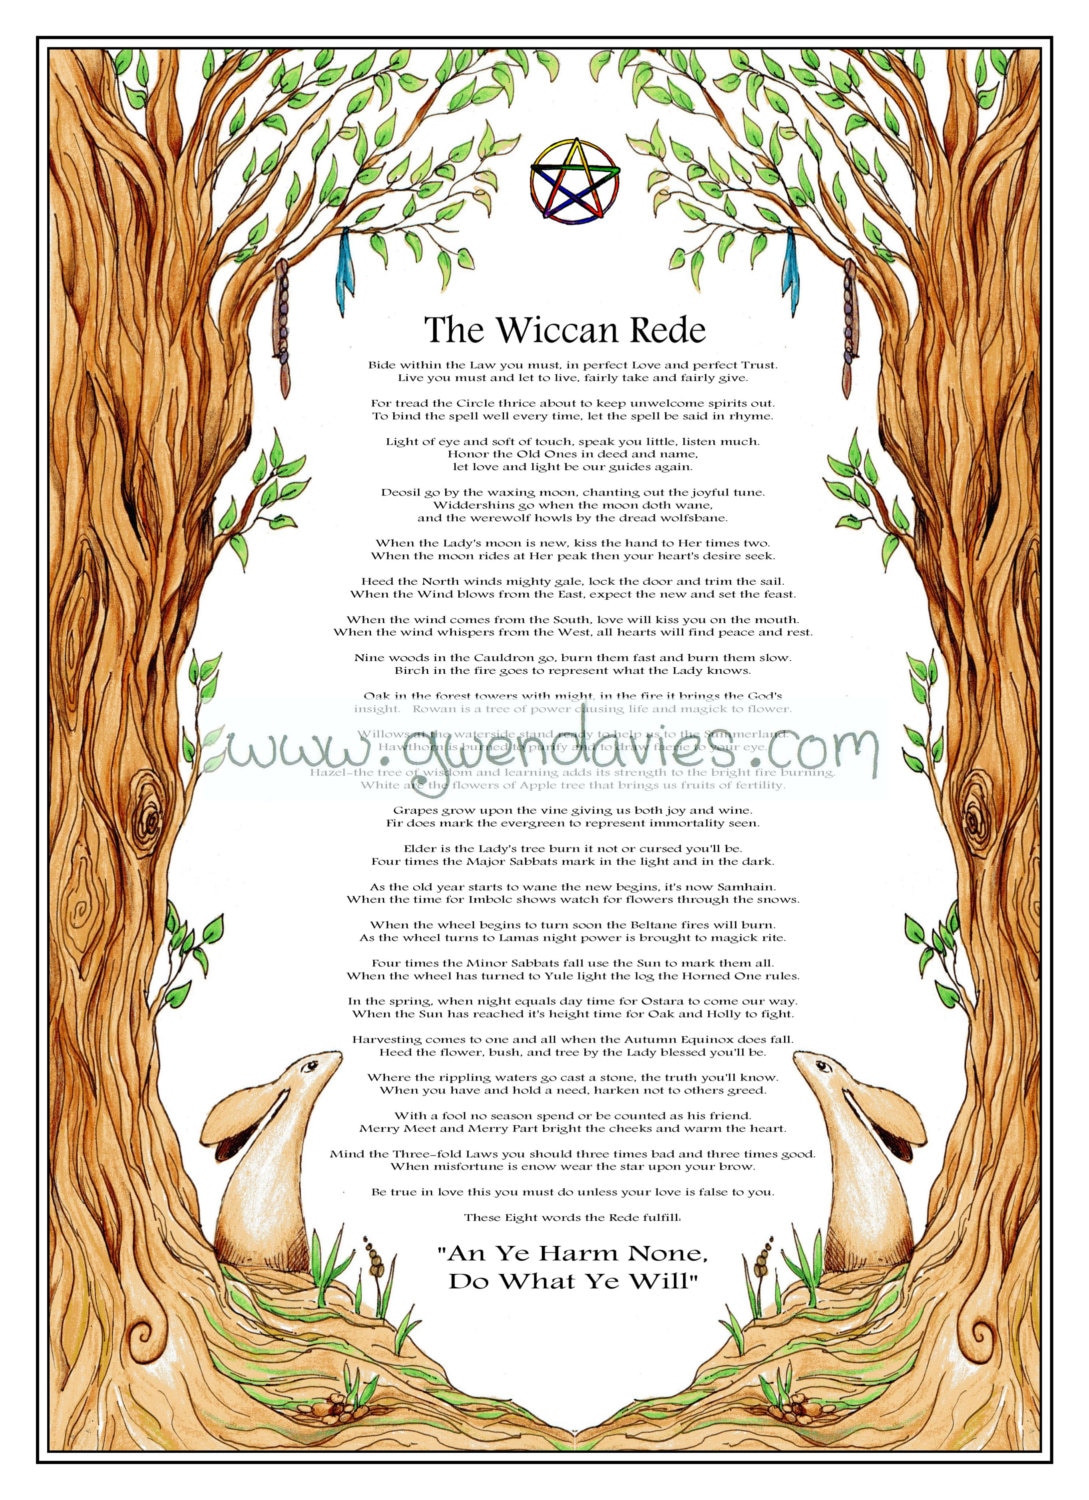 Buy Wiccan Rede Poster A4 Moongazing Hare Digital Download Online in - Etsy